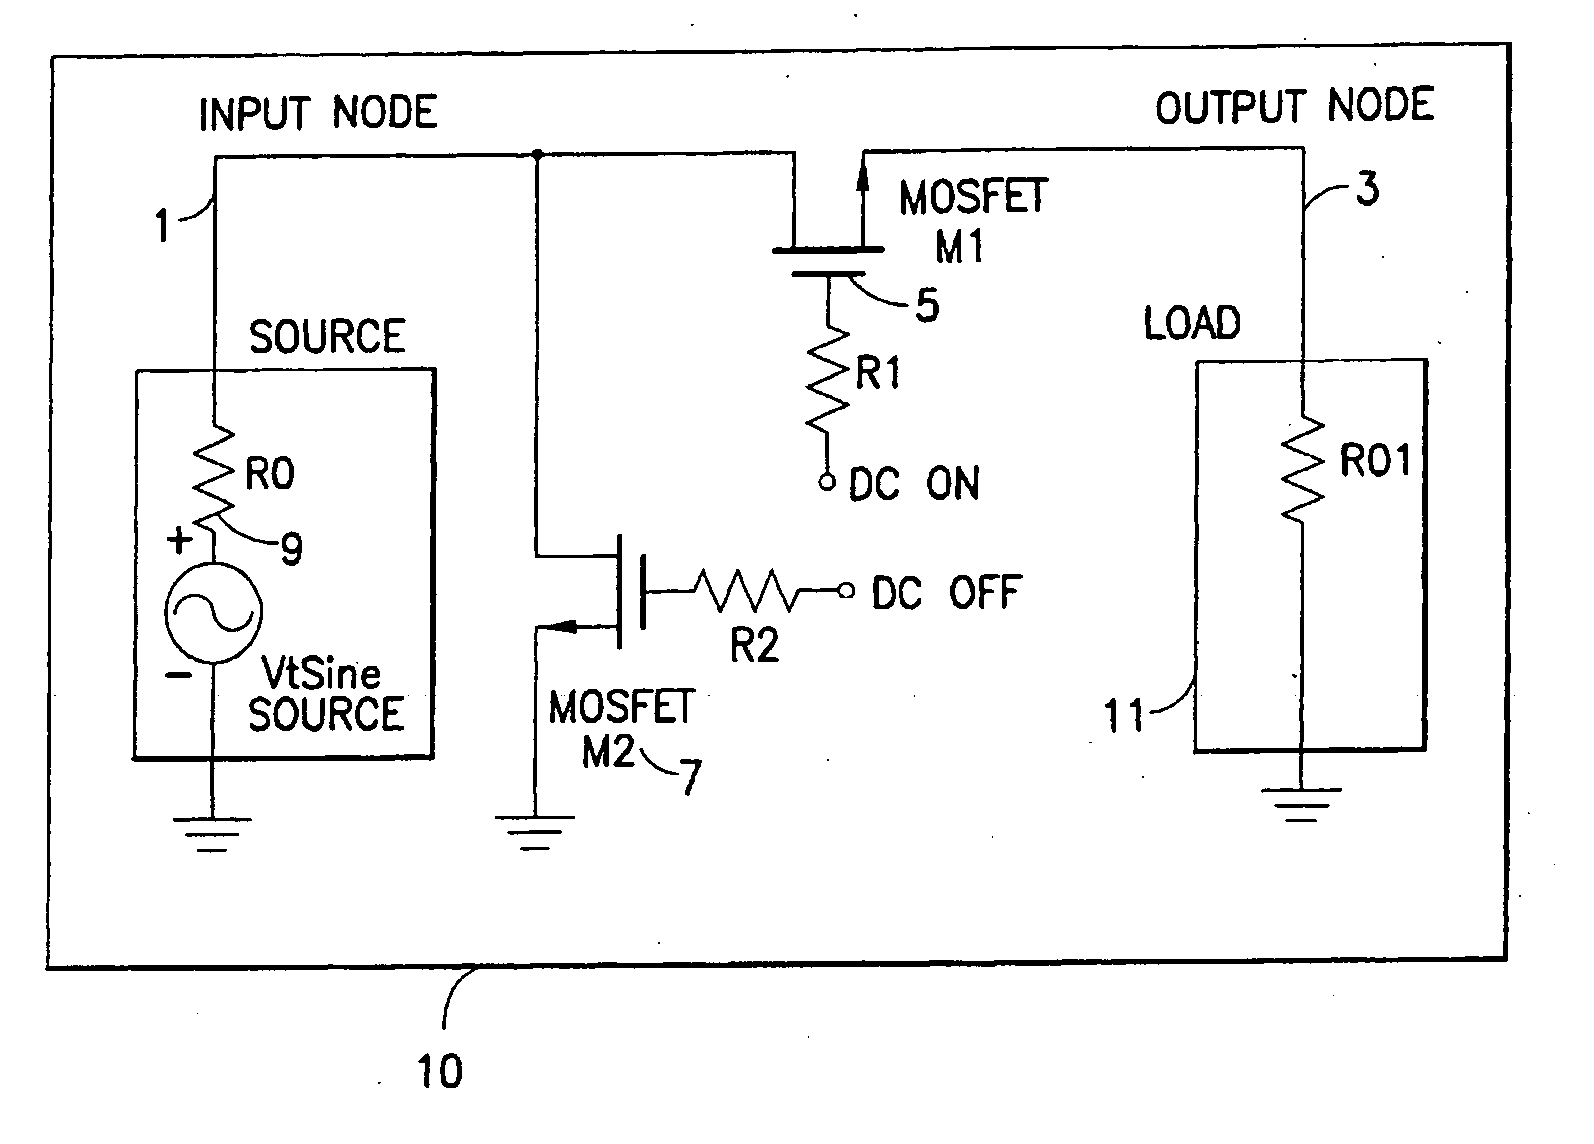 Canceling harmonics in semiconductor RF switches